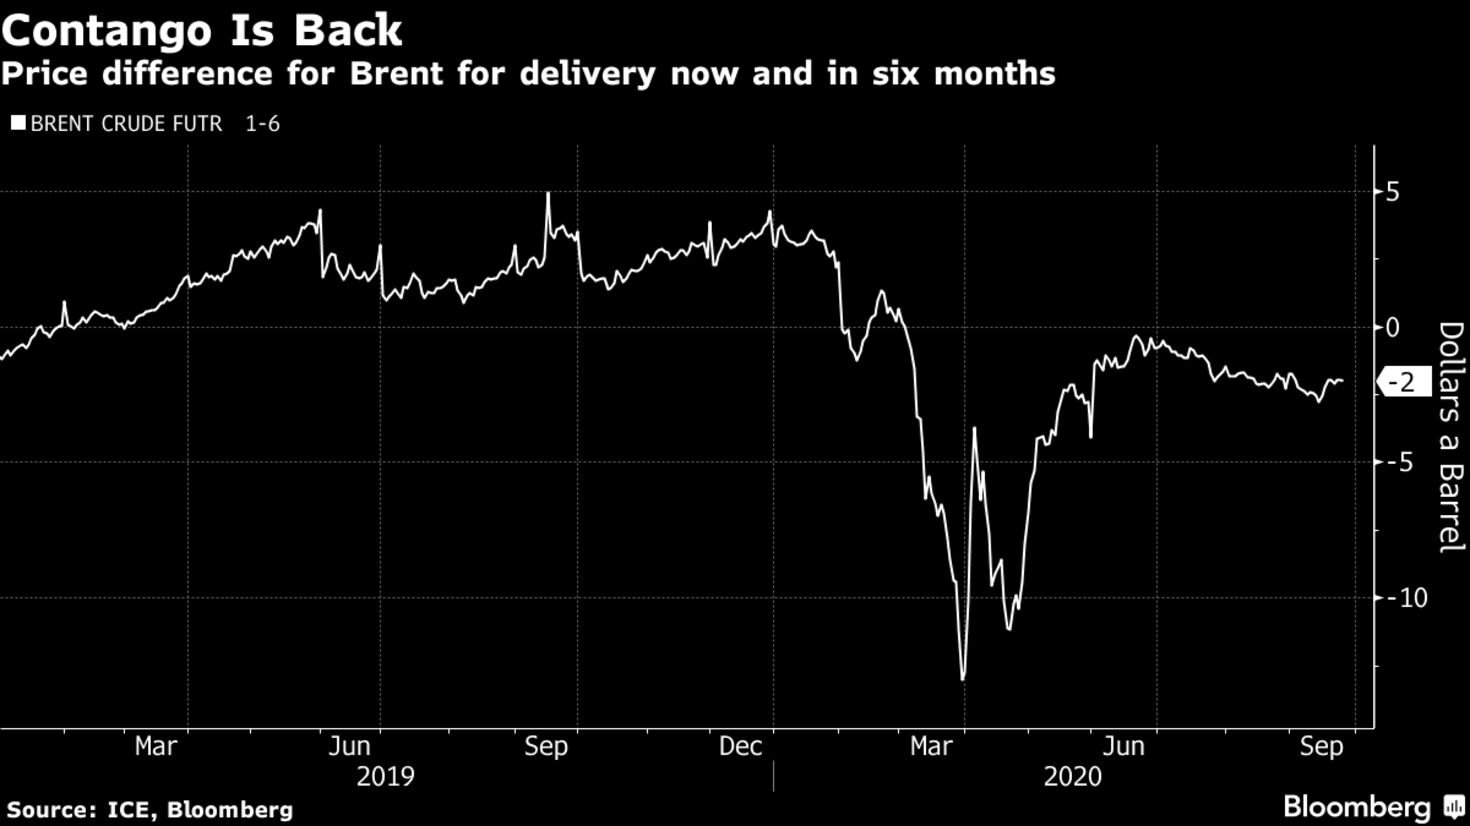 Price difference for Brent for delivery now and in six months